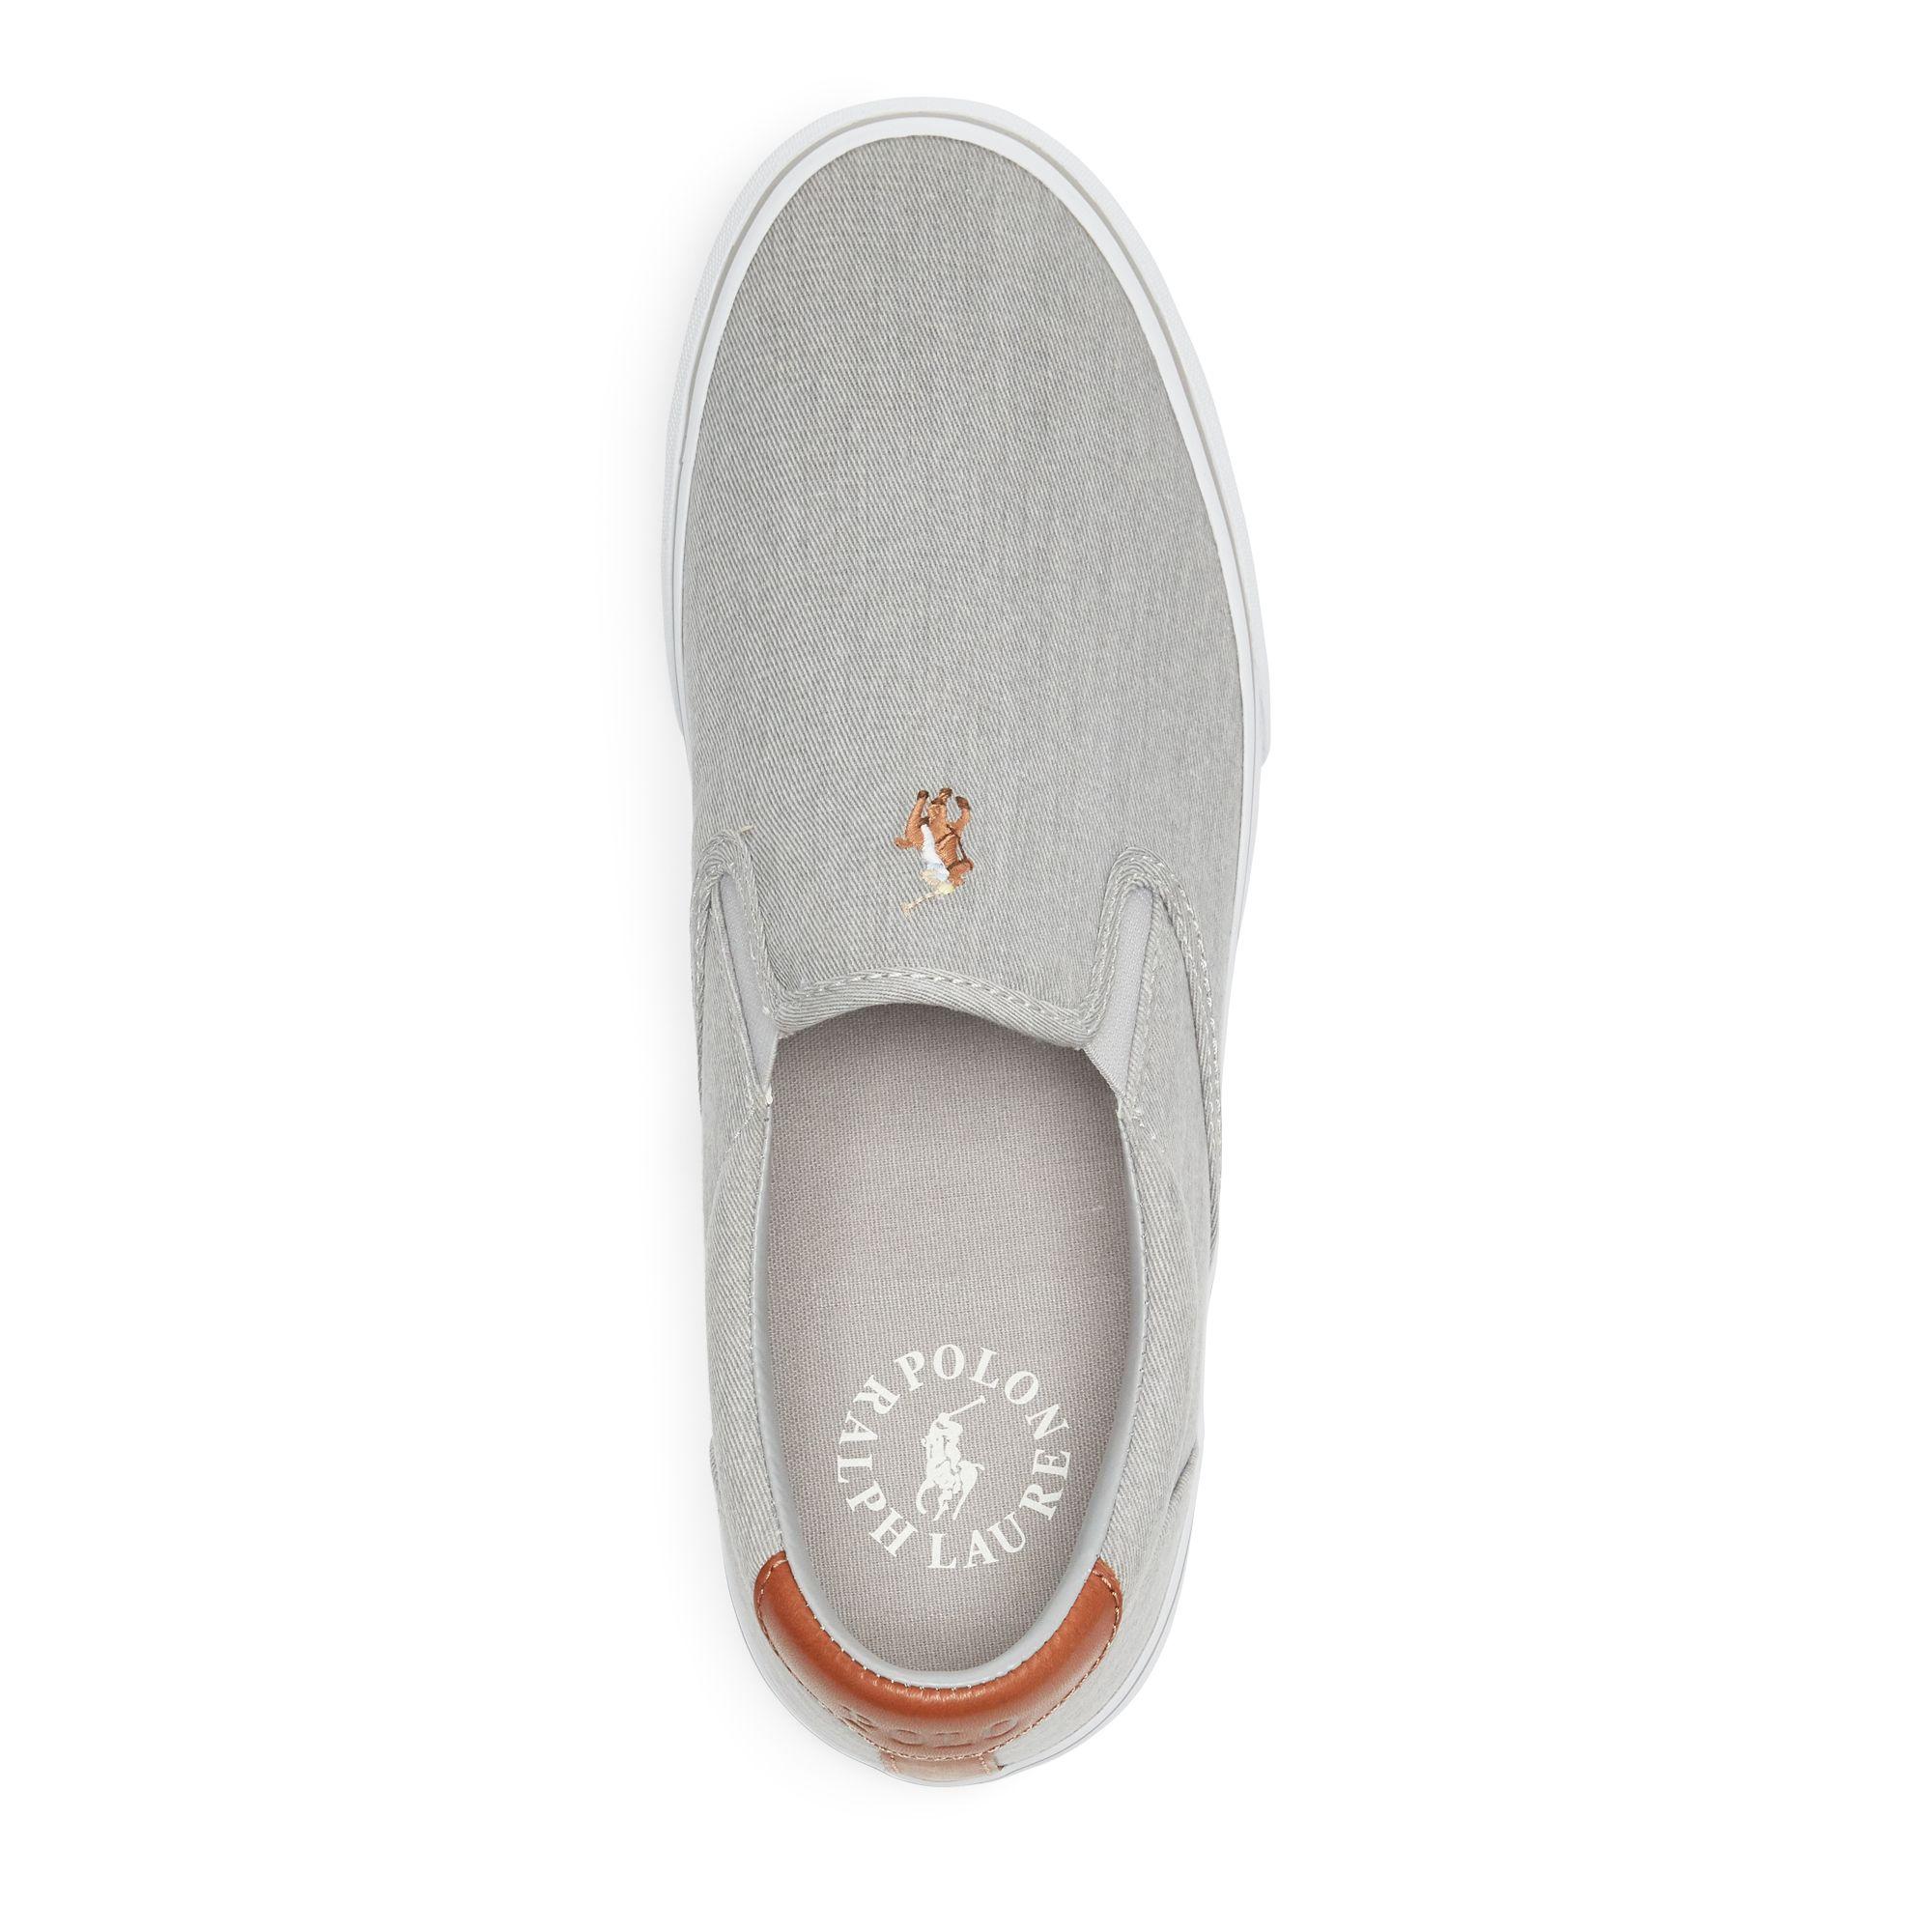 thompson washed twill sneaker